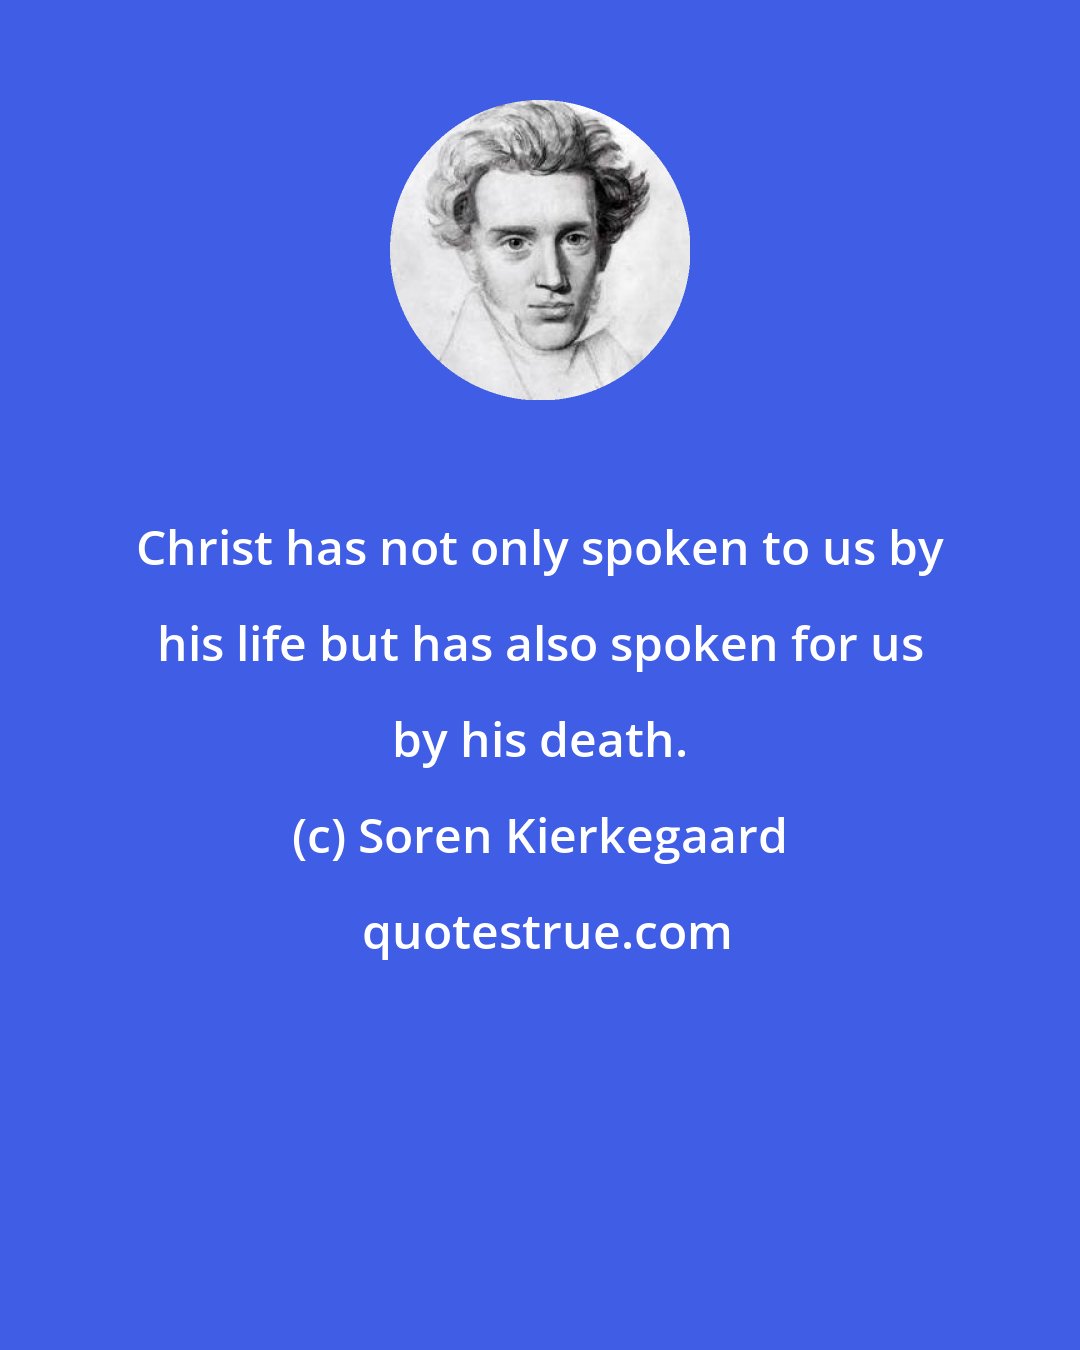 Soren Kierkegaard: Christ has not only spoken to us by his life but has also spoken for us by his death.